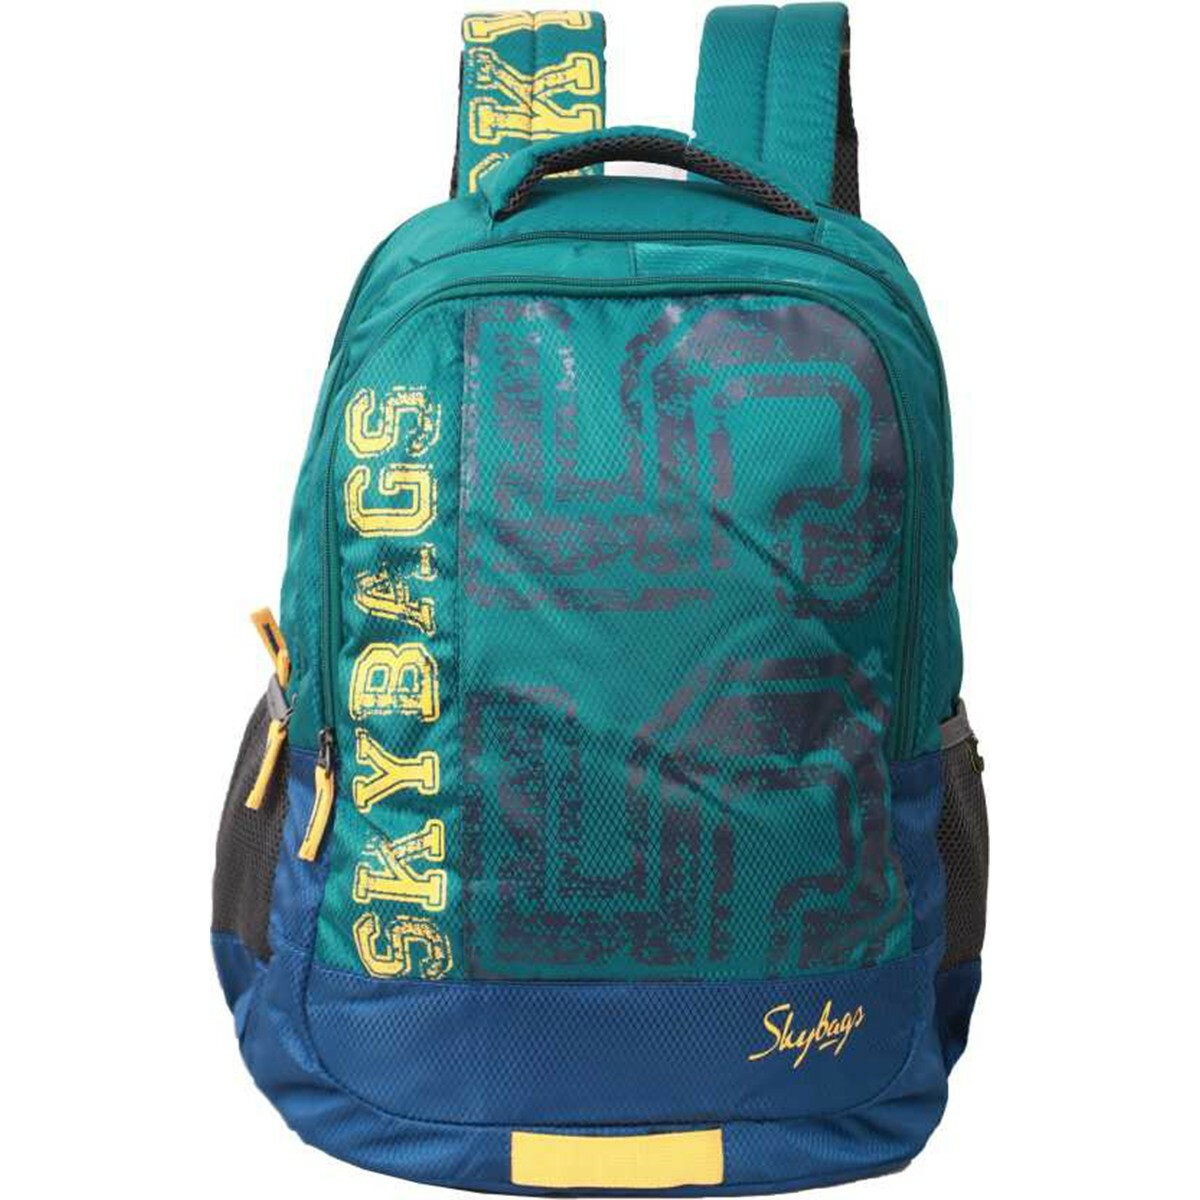 Skybags Backpack New Neon 7 Green